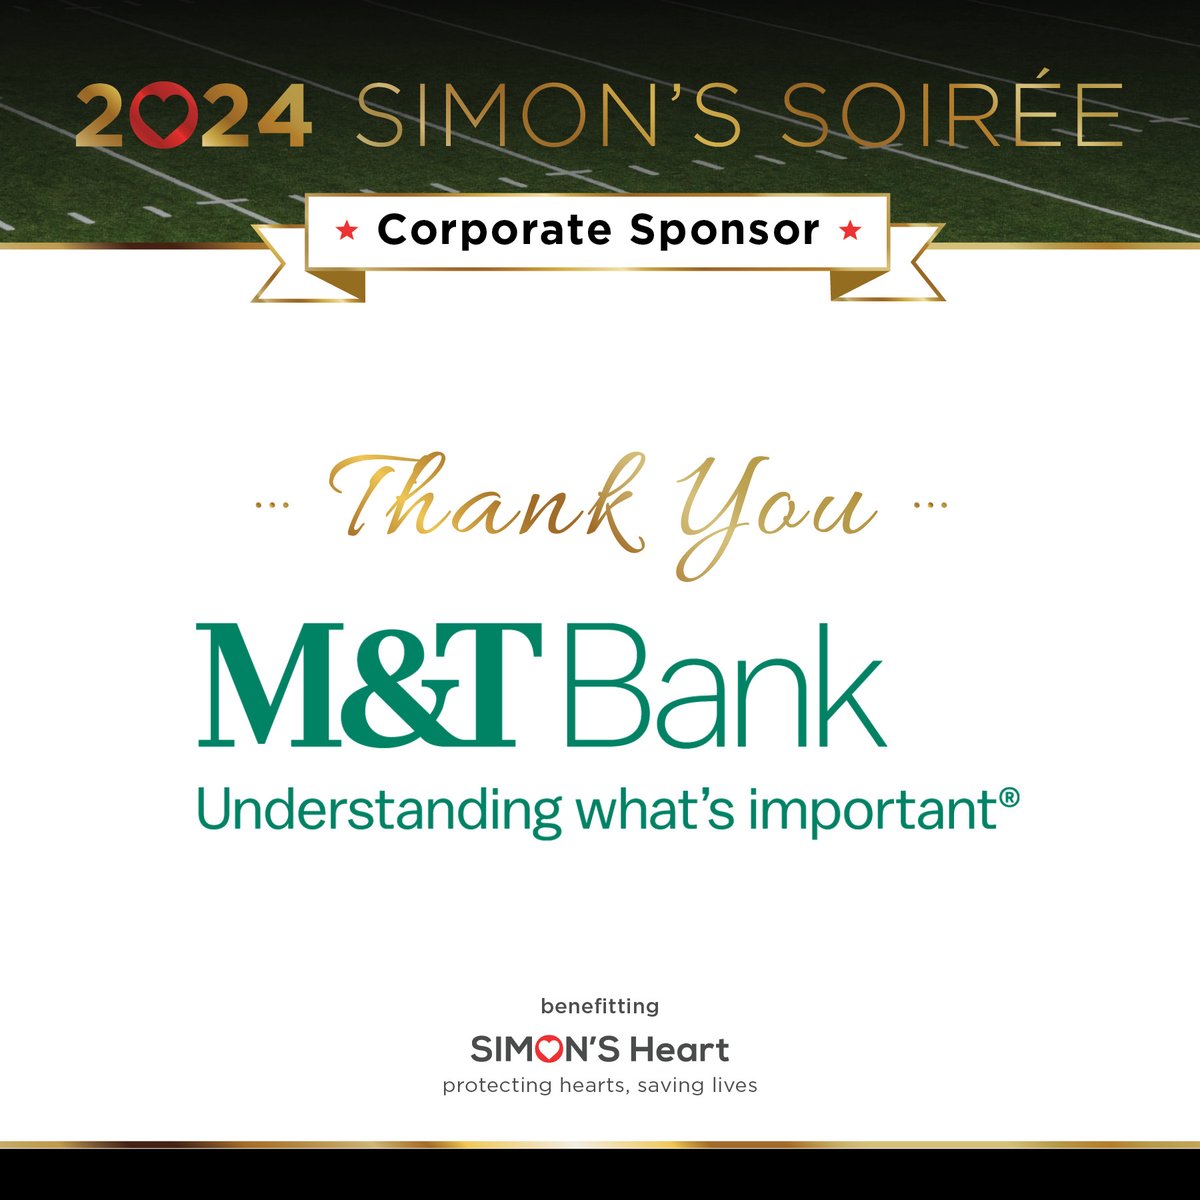 M&T Bank is an early supporter of the Simon’s Heart Ambassador Program and our CPR Jukebox. We are thrilled to have had their friendship and guidance since 2019. Simon’s Soiree is THIS SATURDAY! Purchase your last minute tickets to join us! 🎟️: bit.ly/42A30YN